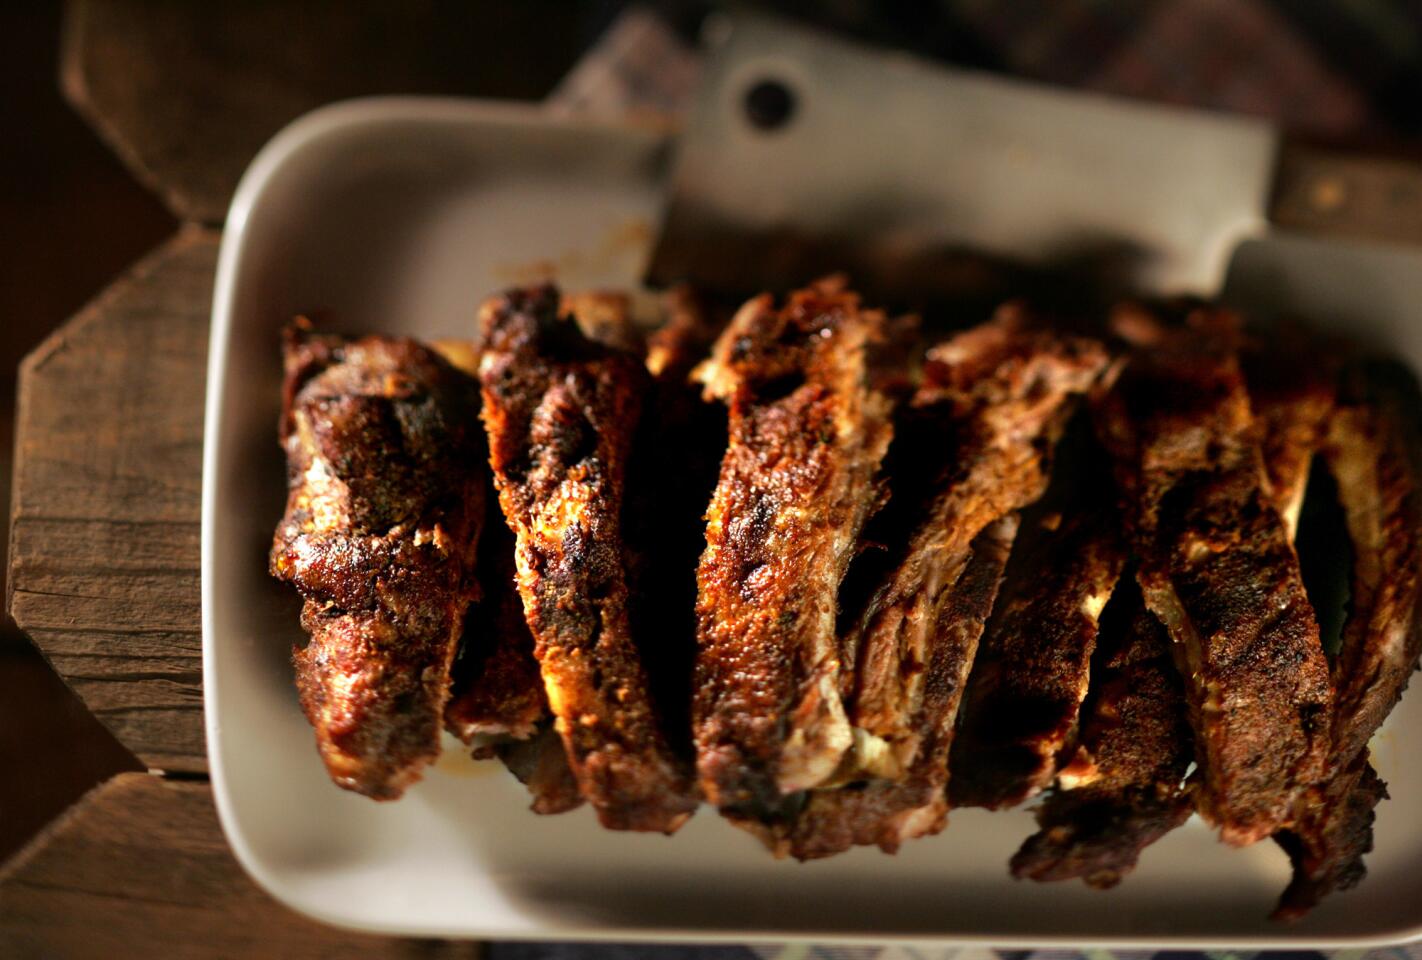 You won't need an outdoor pit: These ribs are made indoors. Click here for the recipe.